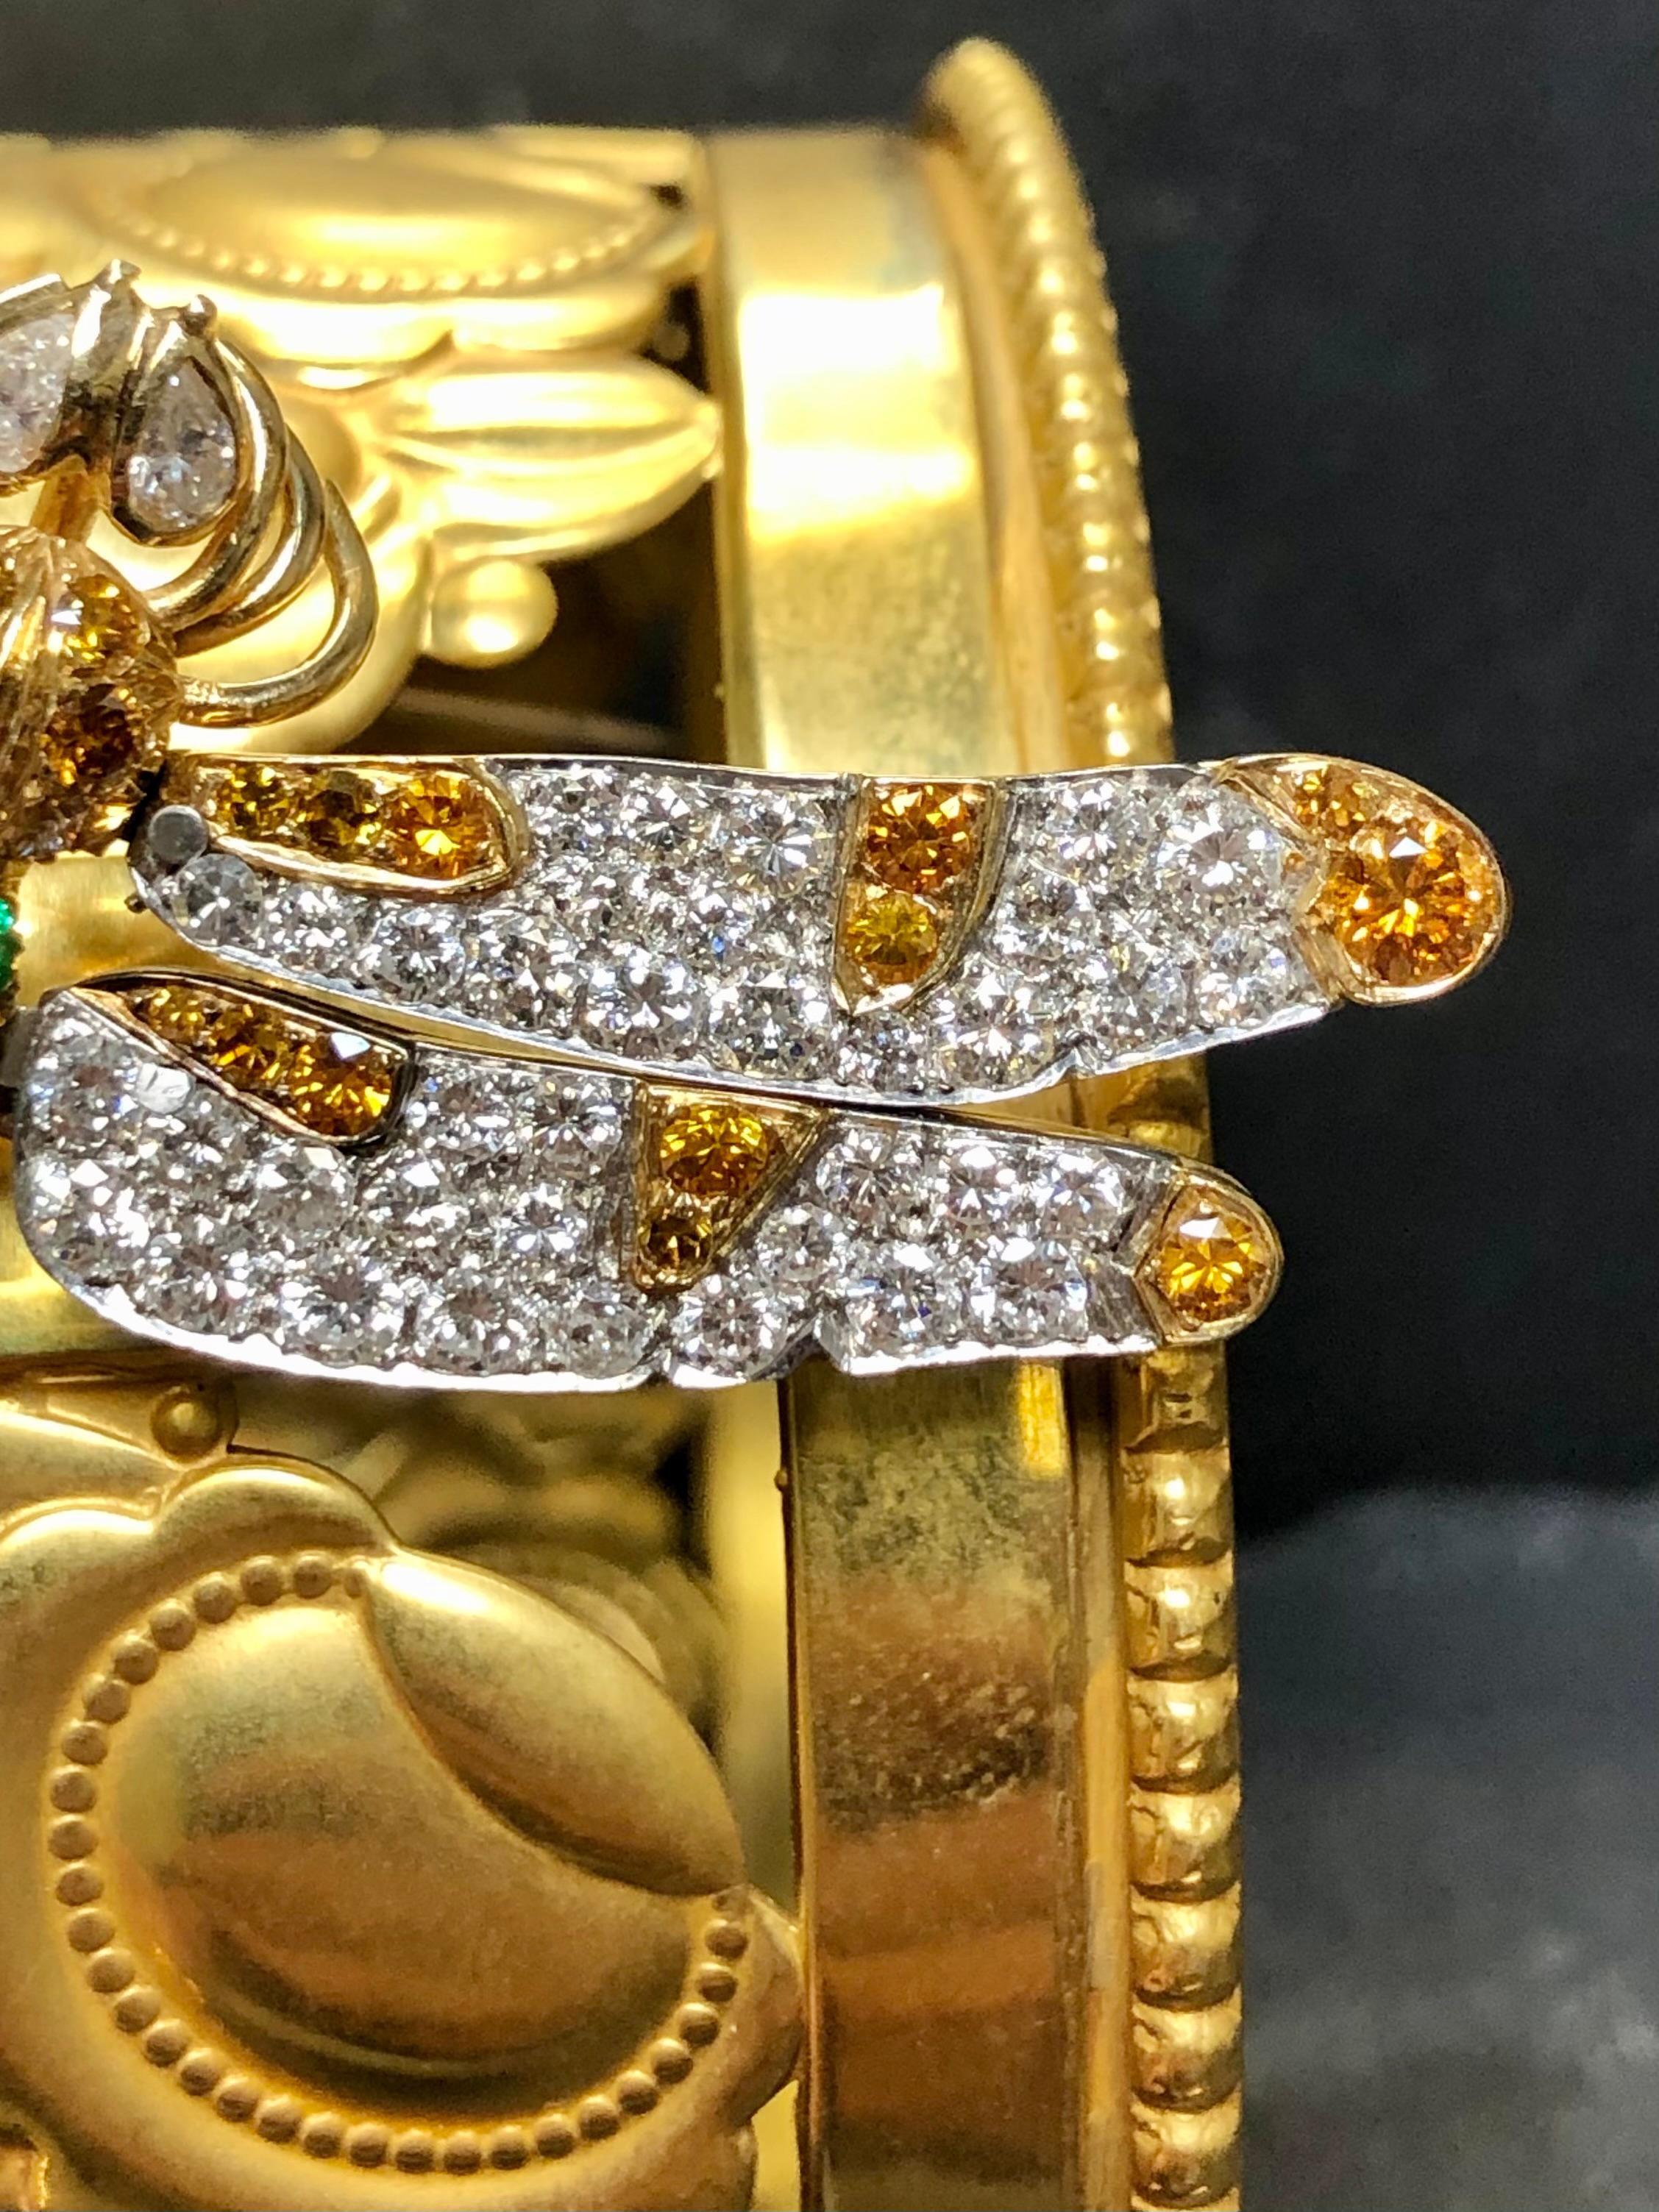 A magnificently detailed dragonfly brooch done in 18K yellow gold and platinum set with approximately 4cttw in G-H color Vs clarity white diamonds as well as approximately 1cttw in orange diamonds and numerous natural emeralds. Notice the azuring in